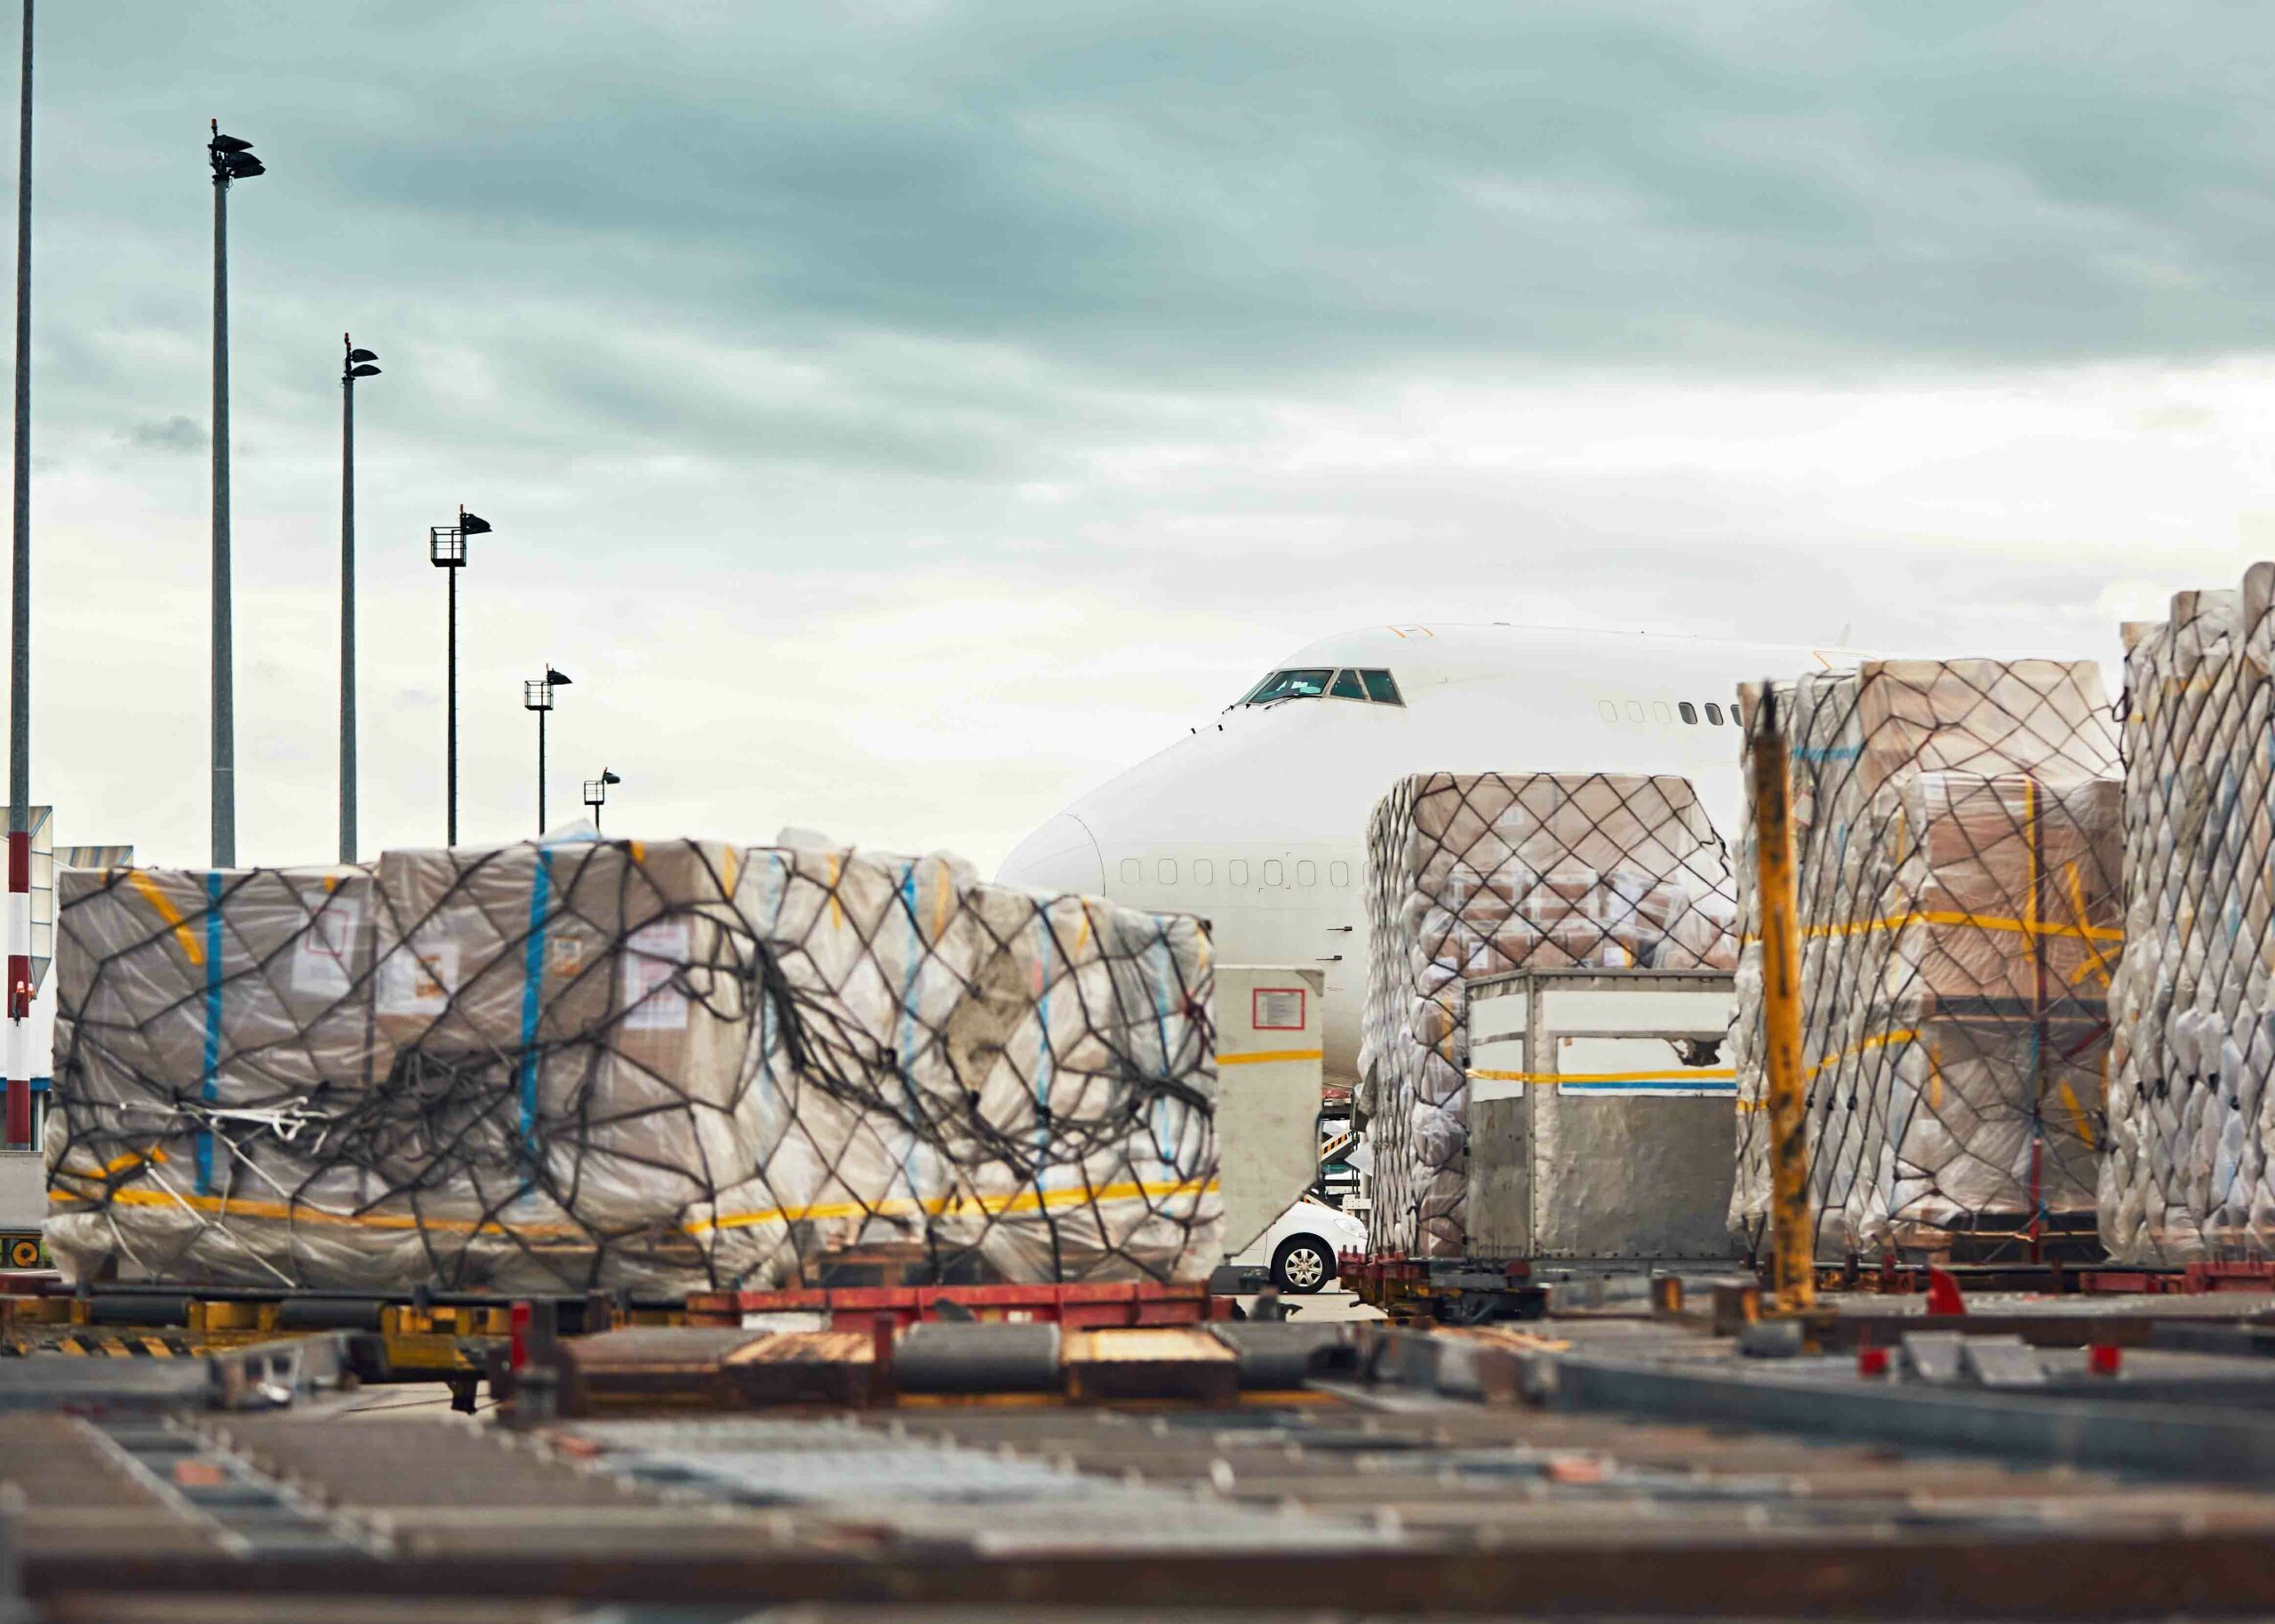 Air freight volumes increased by 9.1% Atlas Logistic Network